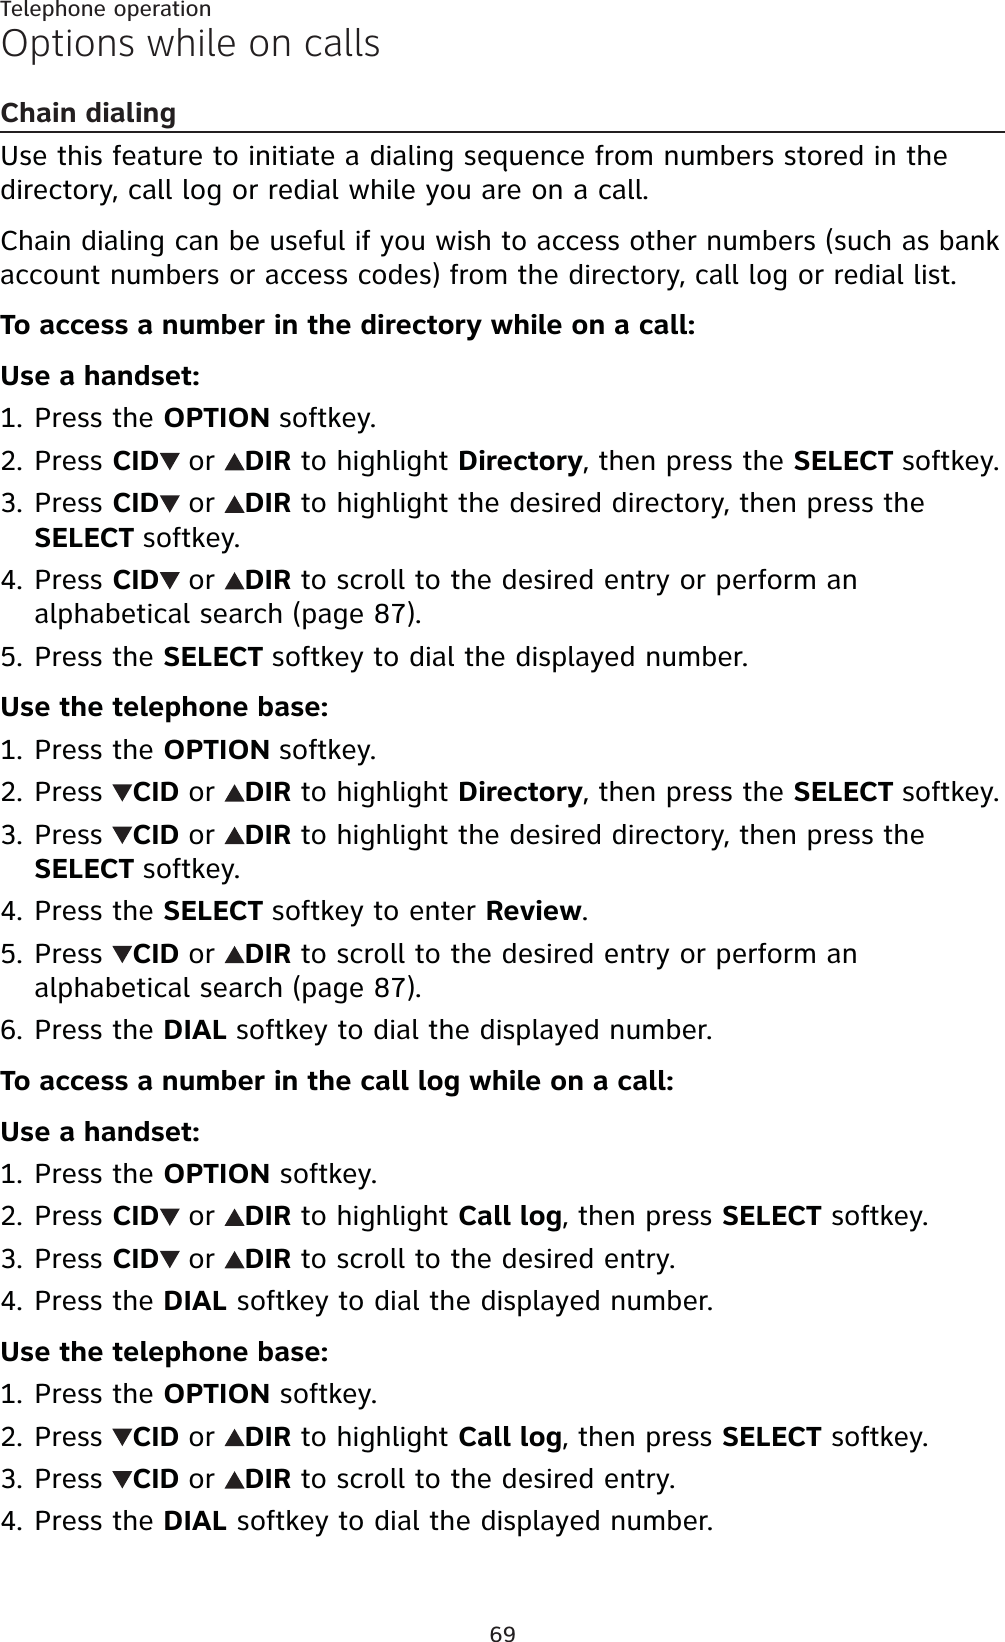 69Telephone operationOptions while on callsChain dialingUse this feature to initiate a dialing sequence from numbers stored in the directory, call log or redial while you are on a call. Chain dialing can be useful if you wish to access other numbers (such as bank account numbers or access codes) from the directory, call log or redial list.To access a number in the directory while on a call:Use a handset:Press the OPTION softkey.Press CID or DIR to highlight Directory, then press the SELECT softkey.Press CID or DIR to highlight the desired directory, then press theSELECT softkey.Press CID or DIR to scroll to the desired entry or perform an alphabetical search (page 87).Press the SELECT softkey to dial the displayed number.Use the telephone base:Press the OPTION softkey.Press  CID or DIR to highlight Directory, then press the SELECT softkey.Press  CID or DIR to highlight the desired directory, then press theSELECT softkey.Press the SELECT softkey to enter Review.Press  CID or DIR to scroll to the desired entry or perform an alphabetical search (page 87).Press the DIAL softkey to dial the displayed number.To access a number in the call log while on a call:Use a handset:Press the OPTION softkey.Press CID or DIR to highlight Call log, then press SELECT softkey.Press CID or DIR to scroll to the desired entry.Press the DIAL softkey to dial the displayed number.Use the telephone base:Press the OPTION softkey.Press  CID or DIR to highlight Call log, then press SELECT softkey.Press  CID or DIR to scroll to the desired entry.Press the DIAL softkey to dial the displayed number.1.2.3.4.5.1.2.3.4.5.6.1.2.3.4.1.2.3.4.